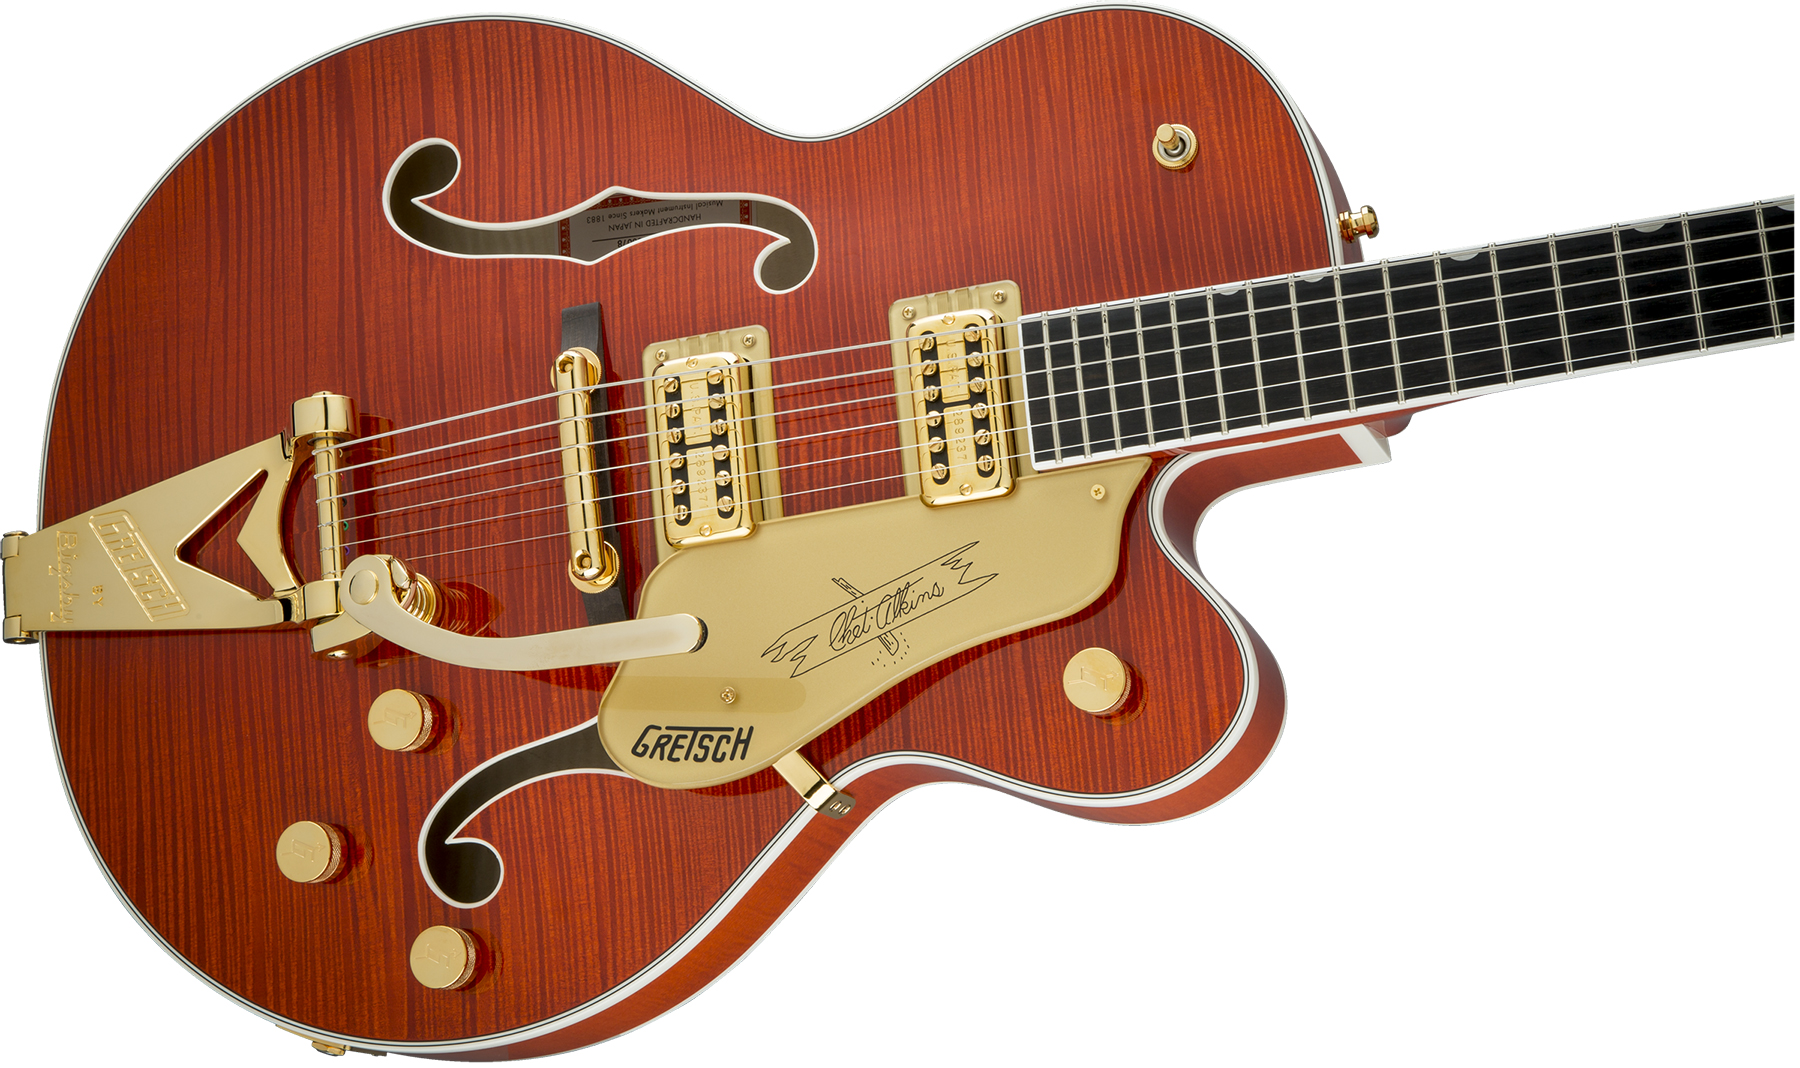 Gretsch G6120tfm Players Edition Nashville Pro Jap Bigsby Eb - Orange Stain - Semi-hollow electric guitar - Variation 2